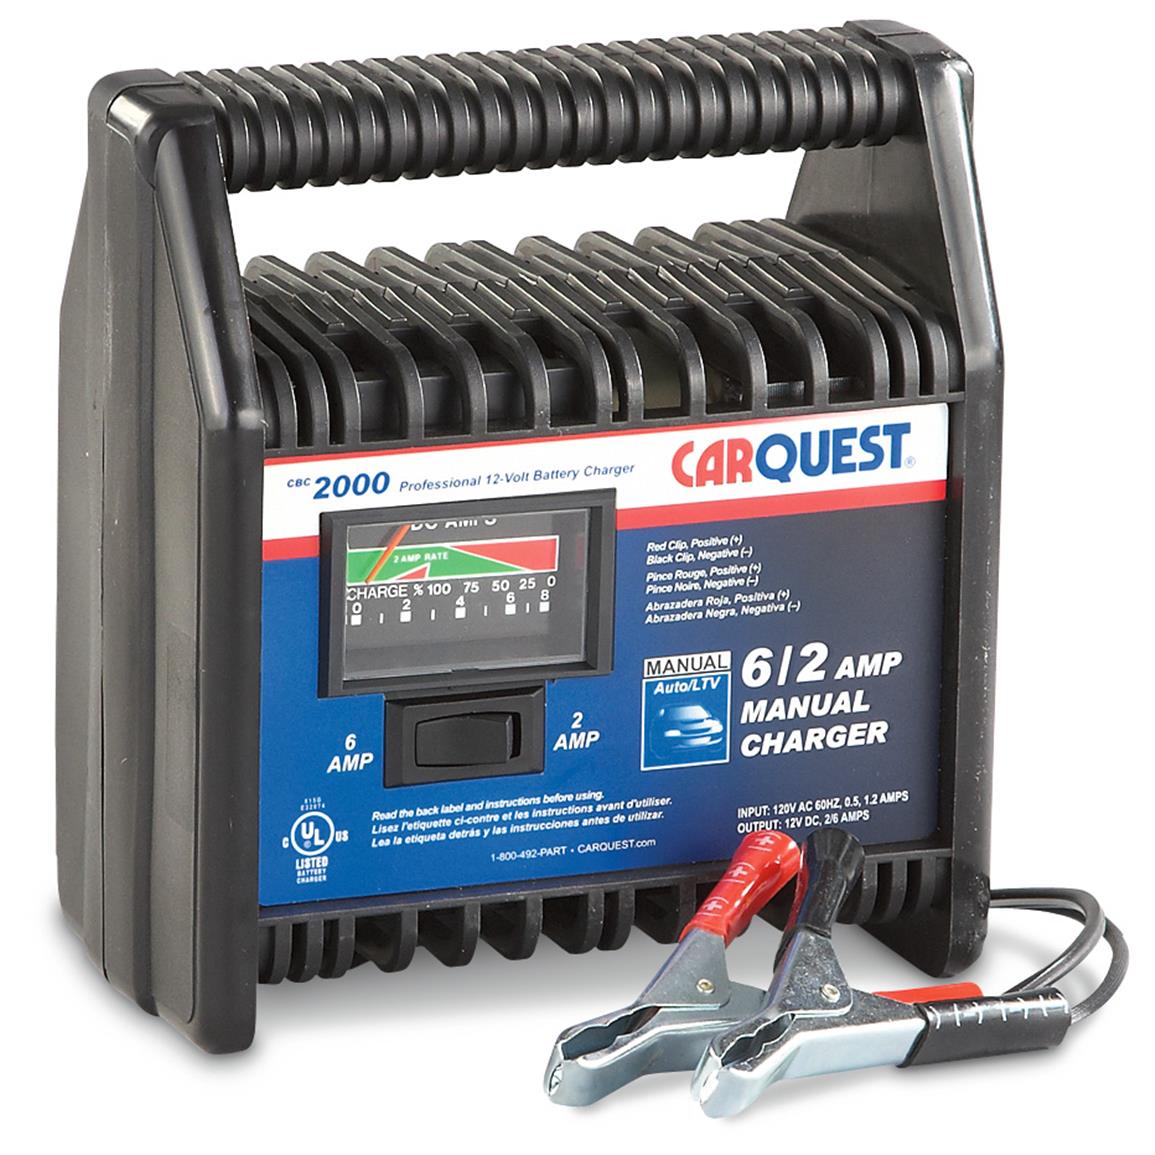 Carquest 12v 6 2 Amp Battery Charger Chargers Jump Starters At Sportsman S Guide